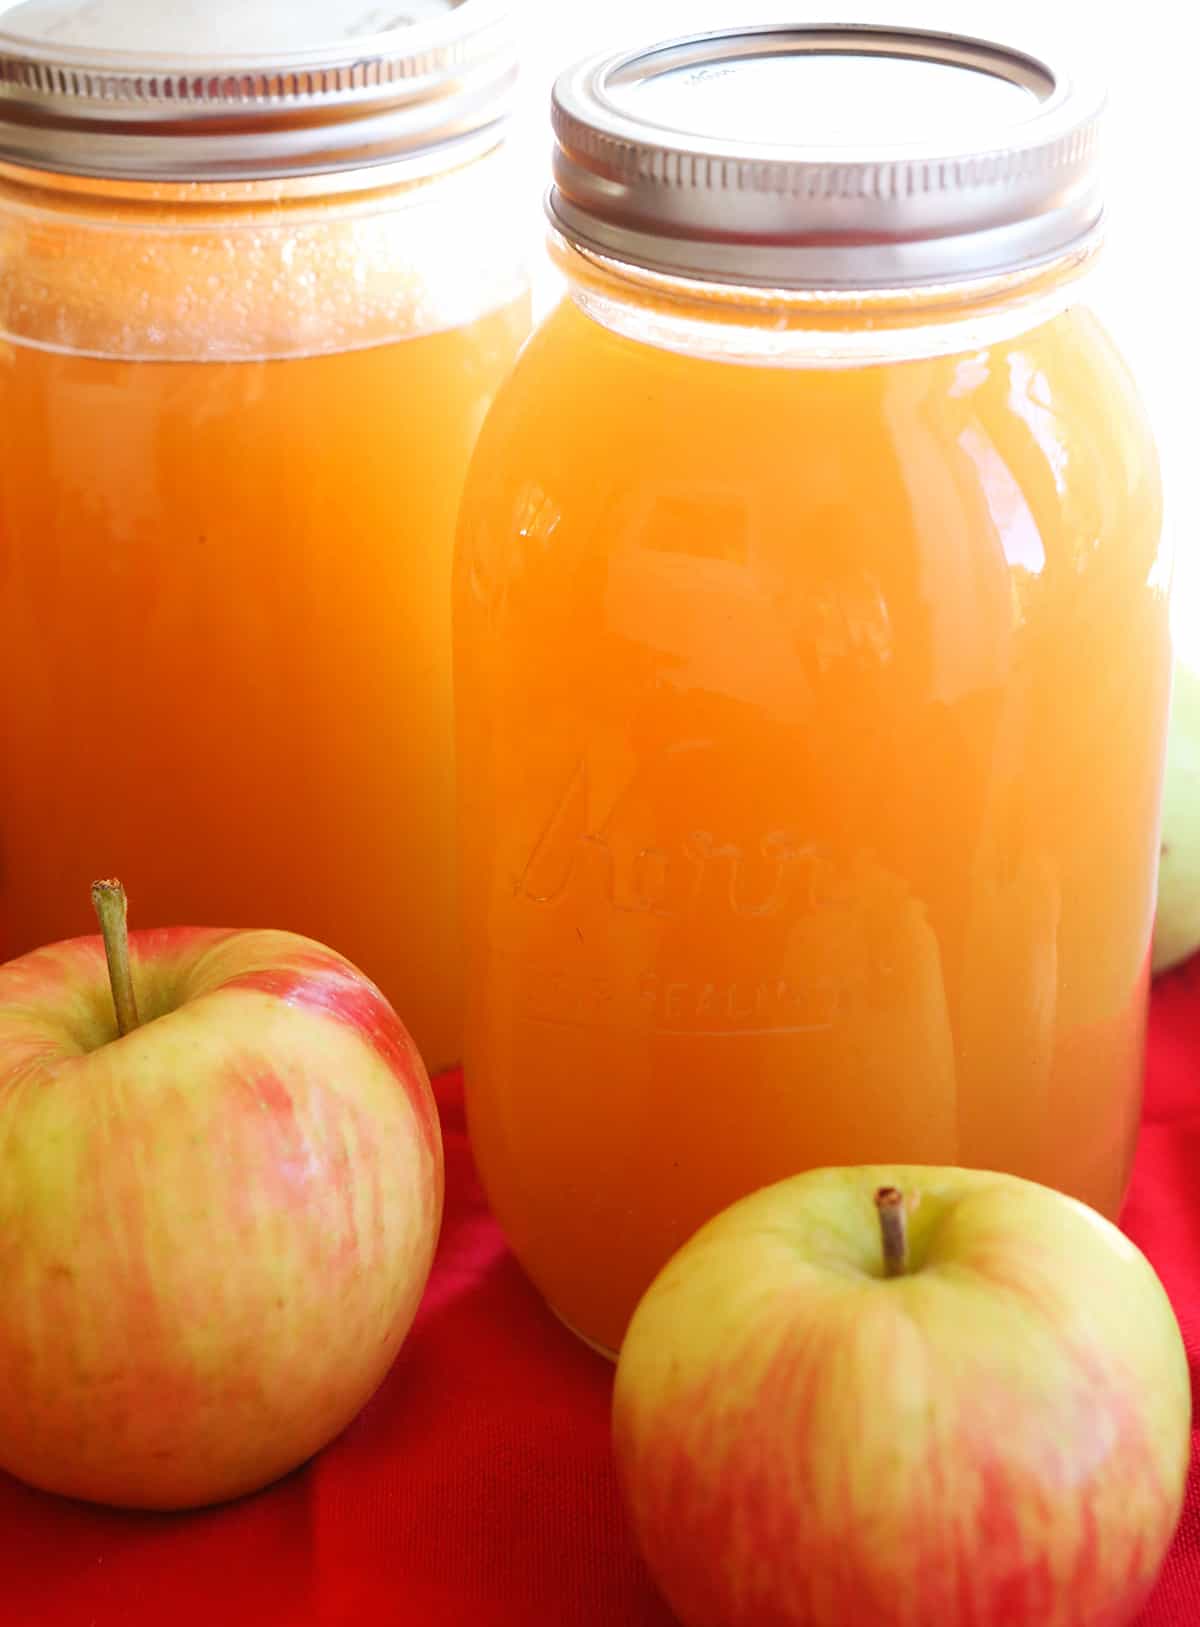 quarts of fresh cider with whole apples in front of them.